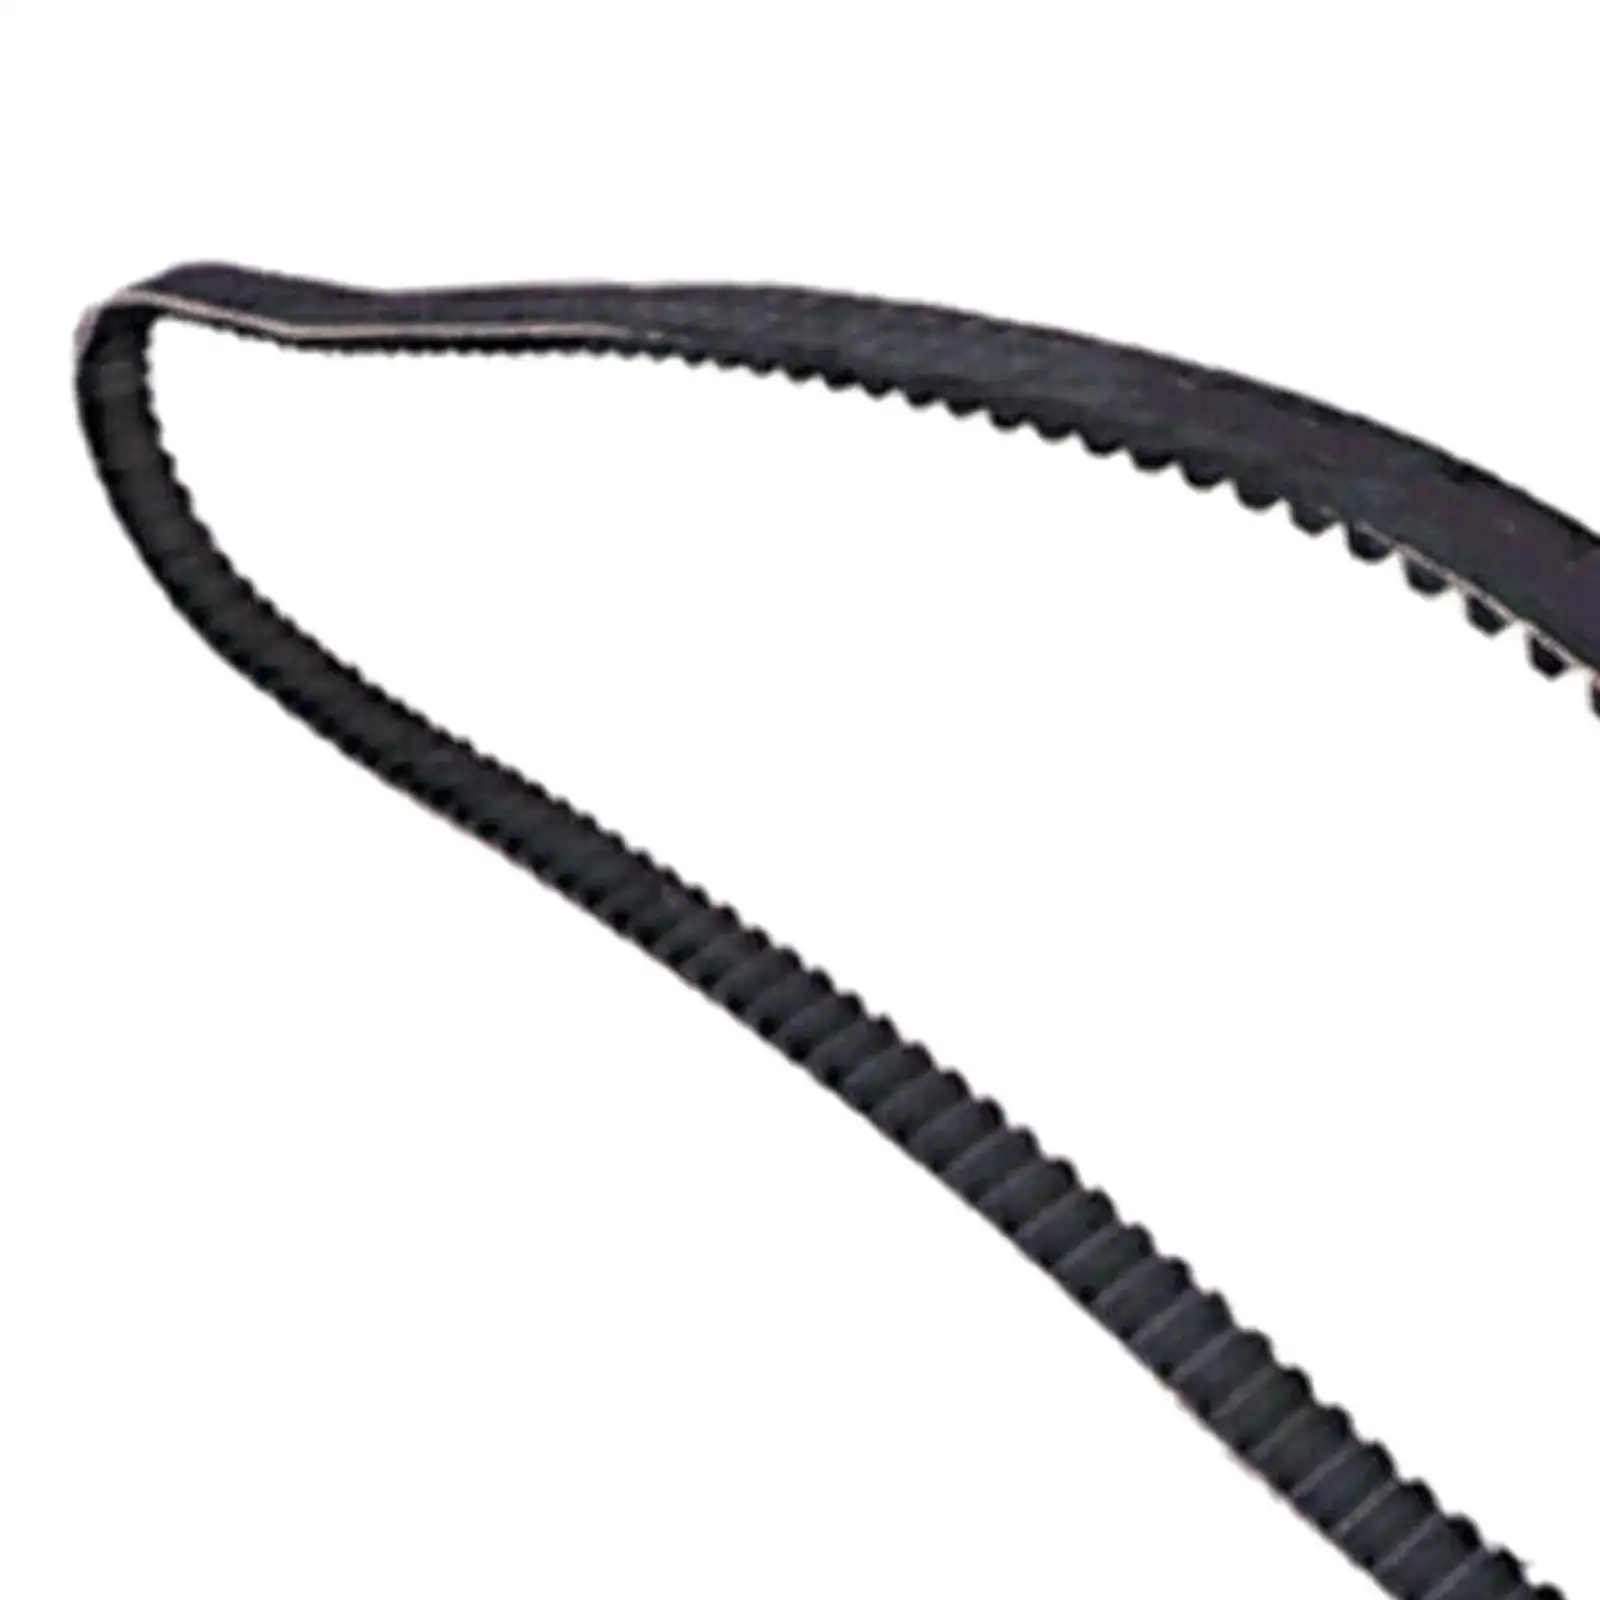 Rear Drive Belt Motorcycle Accessories Rubber 1204-0051 40015-00 133 Tooth 1 1/8